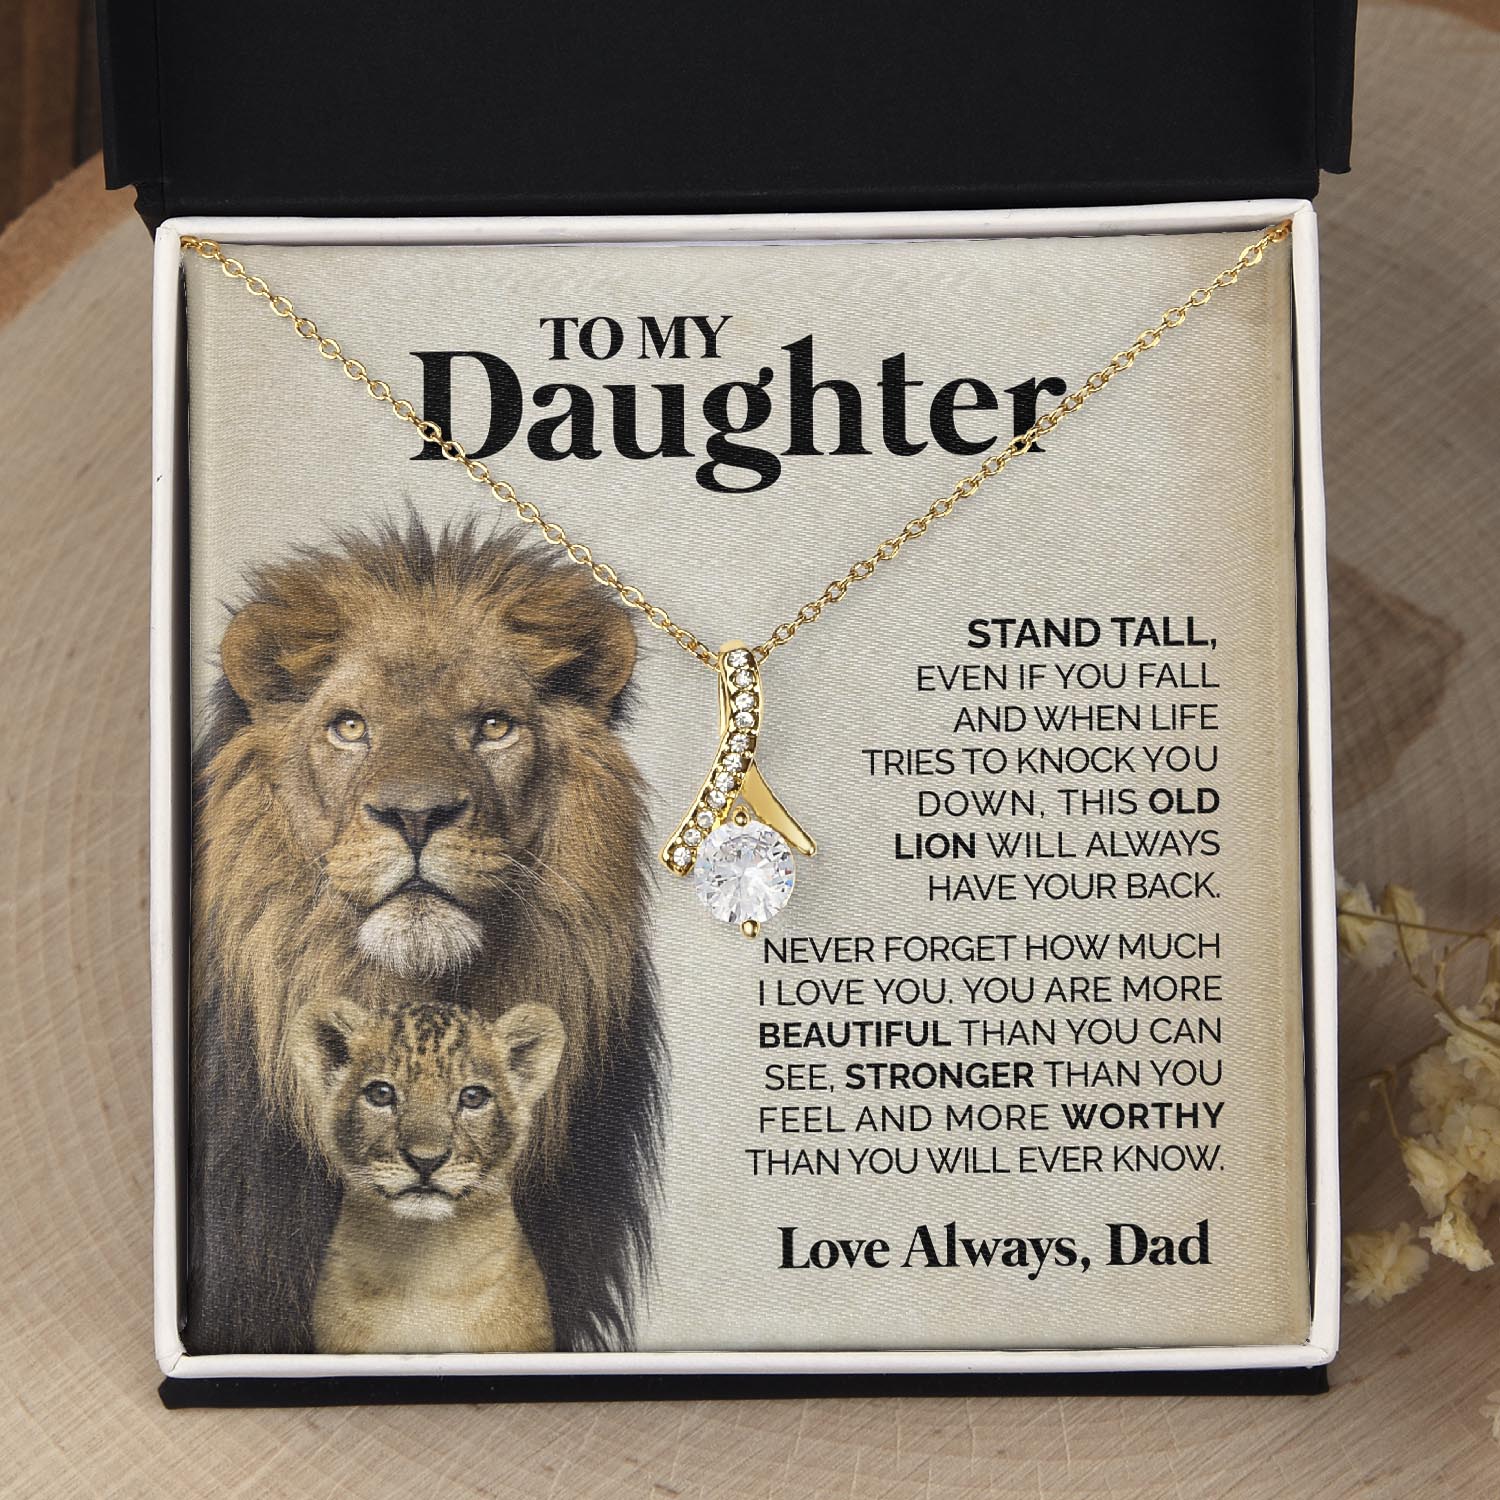 ShineOn Fulfillment Jewelry 18K Yellow Gold Finish / Two-Toned Box To my Daughter from Dad - Stand tall - Ribbon Necklace